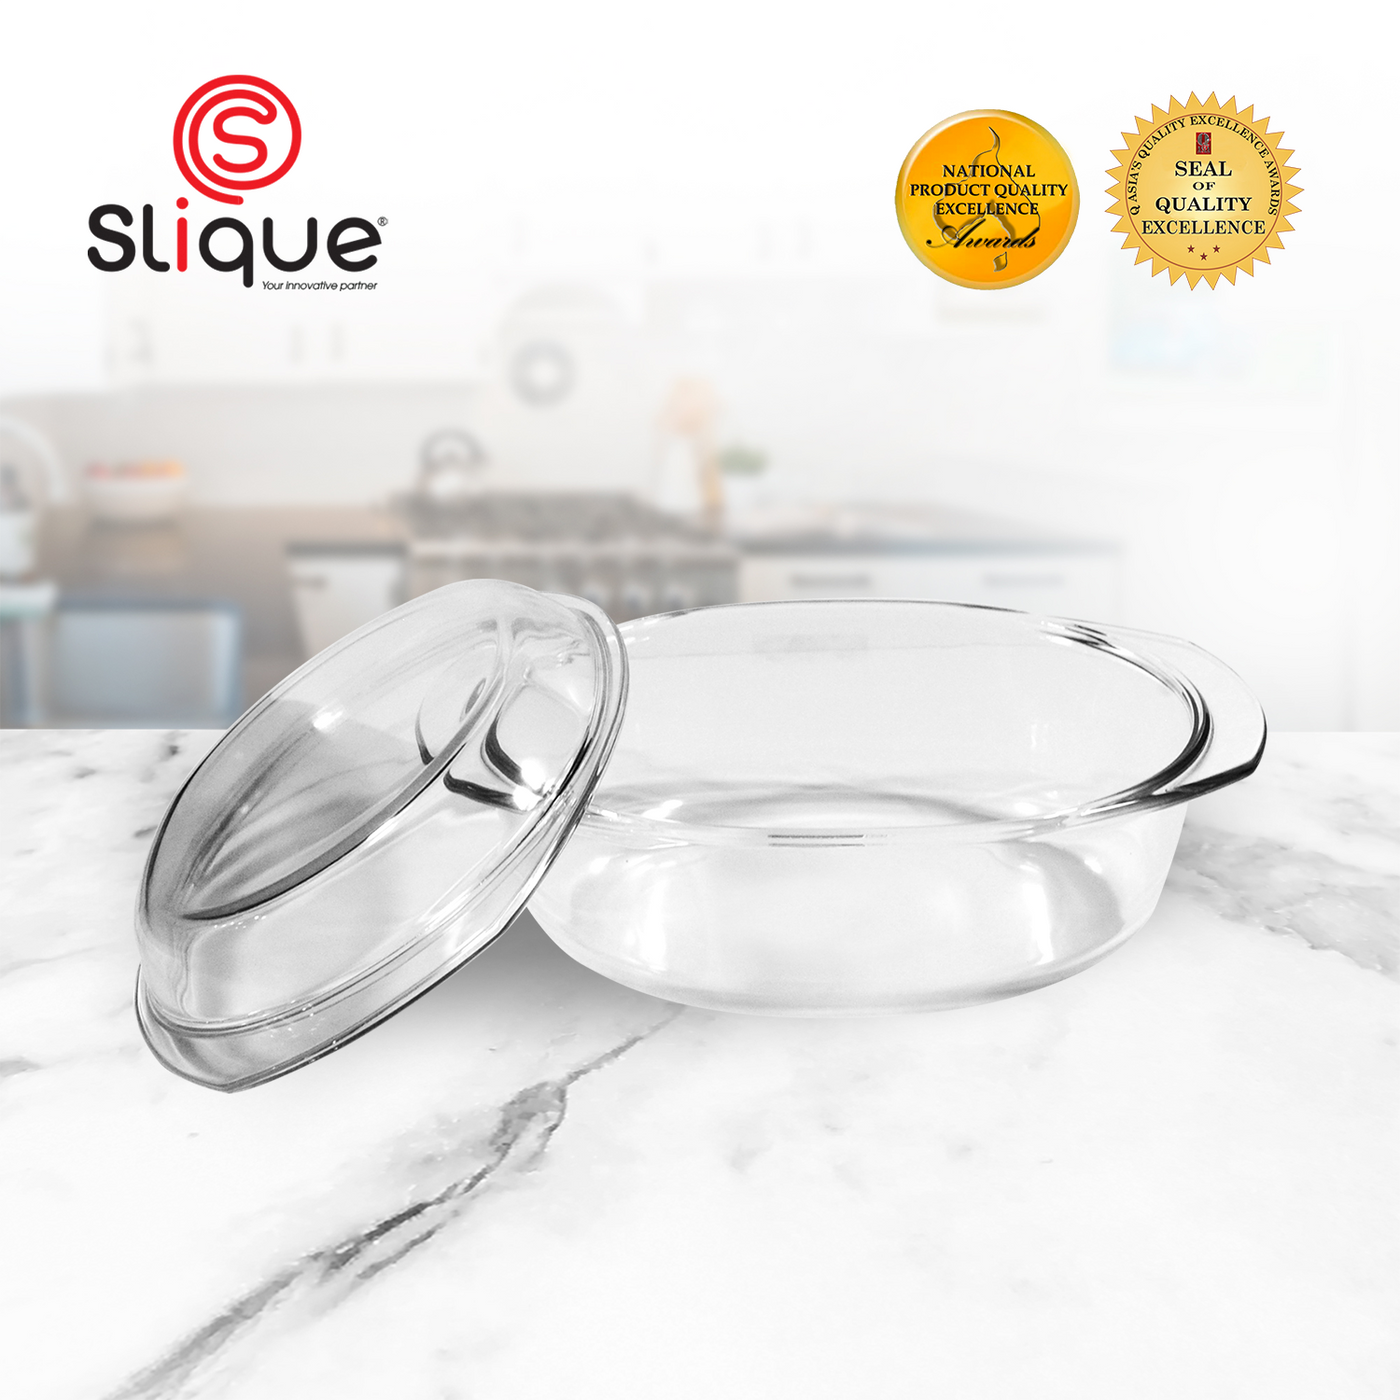 SLIQUE Premium Borosilicate Oval Glass Baking Dish Microwave & Oven Safe 1000ml Baking Essentials Amazing Gift Idea For Any Occasion!